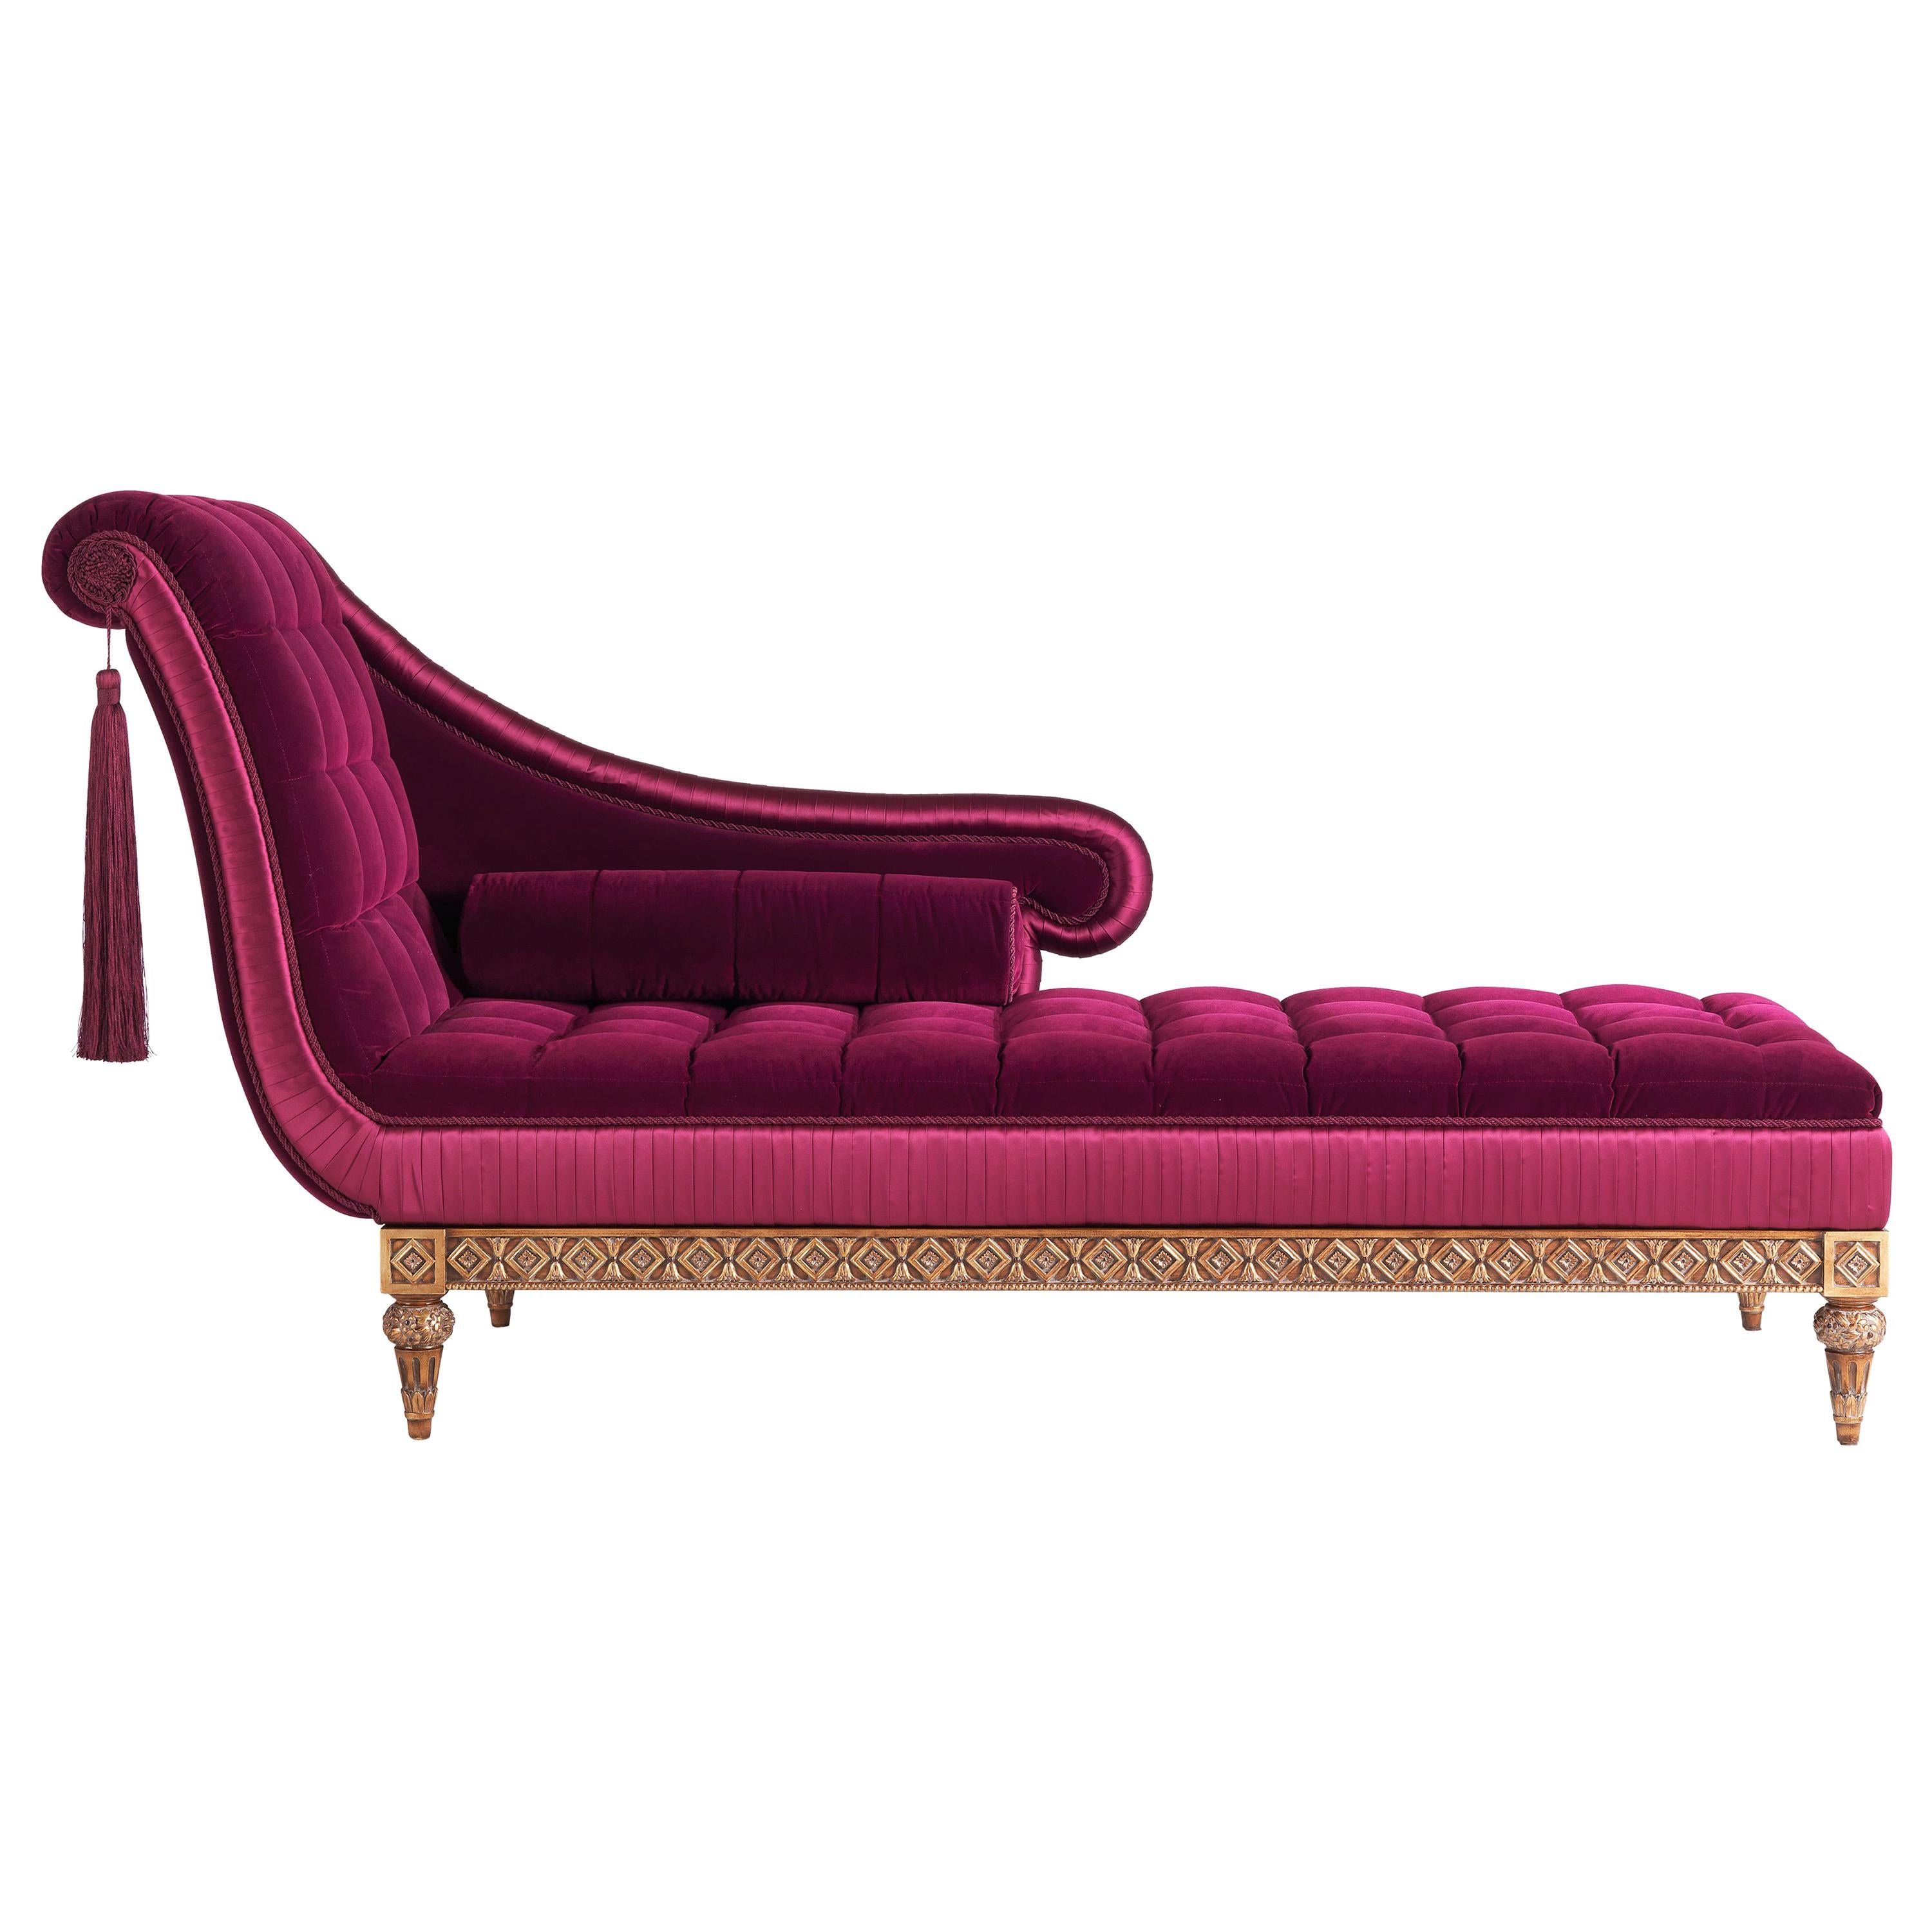 Jacqueline Italian Dormeuse in Wood with Velvet and Satin Details by Zanaboni